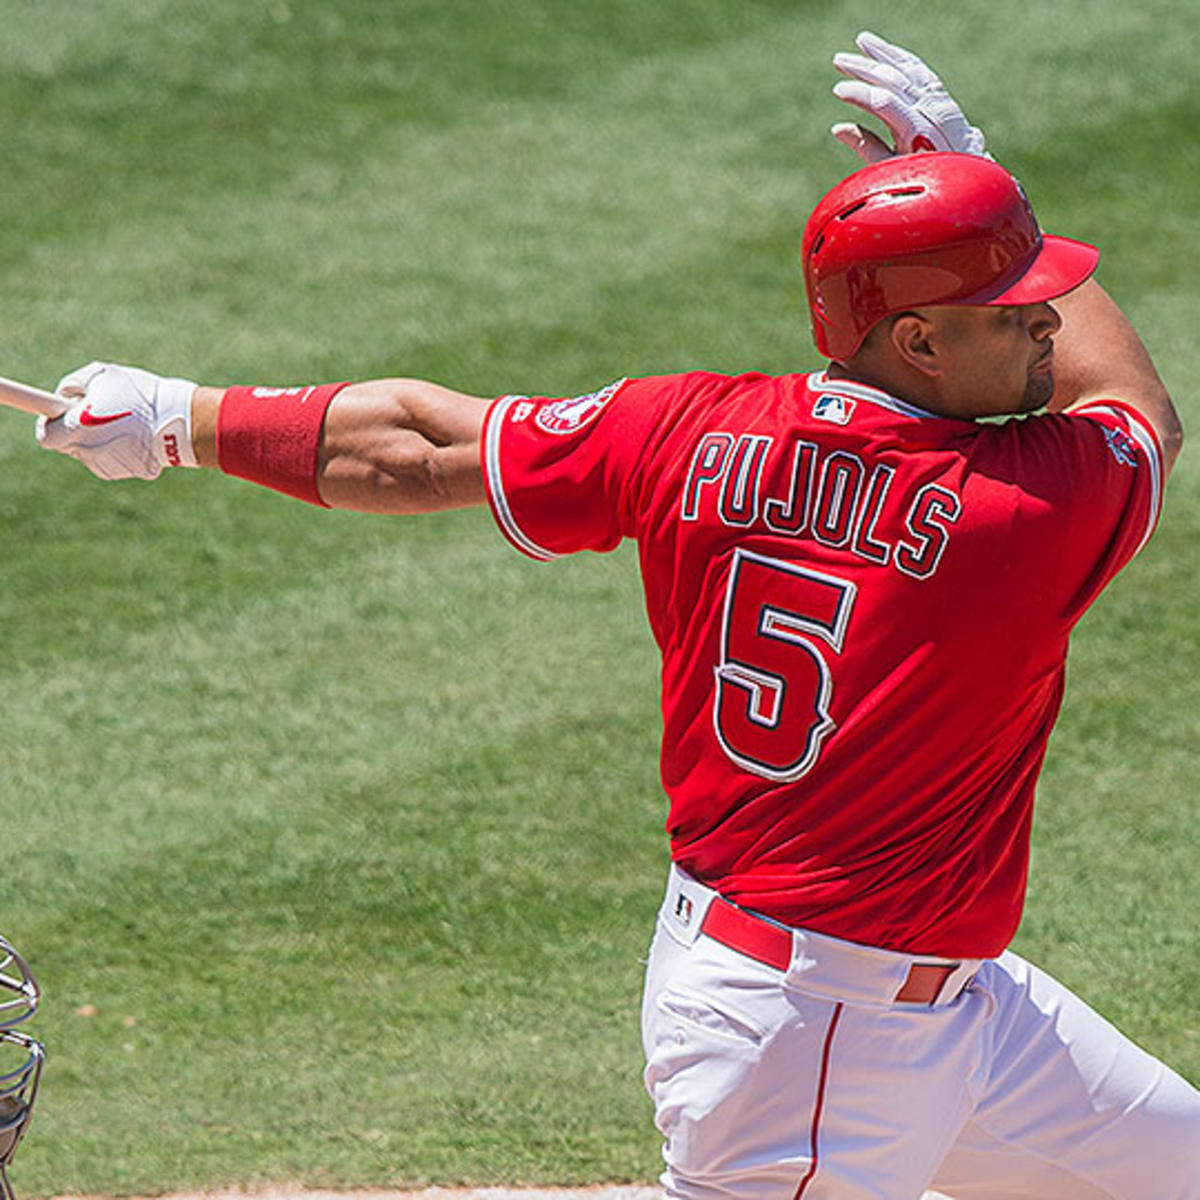 Pujols's Dodgers Debut, the Twins' Struggles, and the Best Hitter